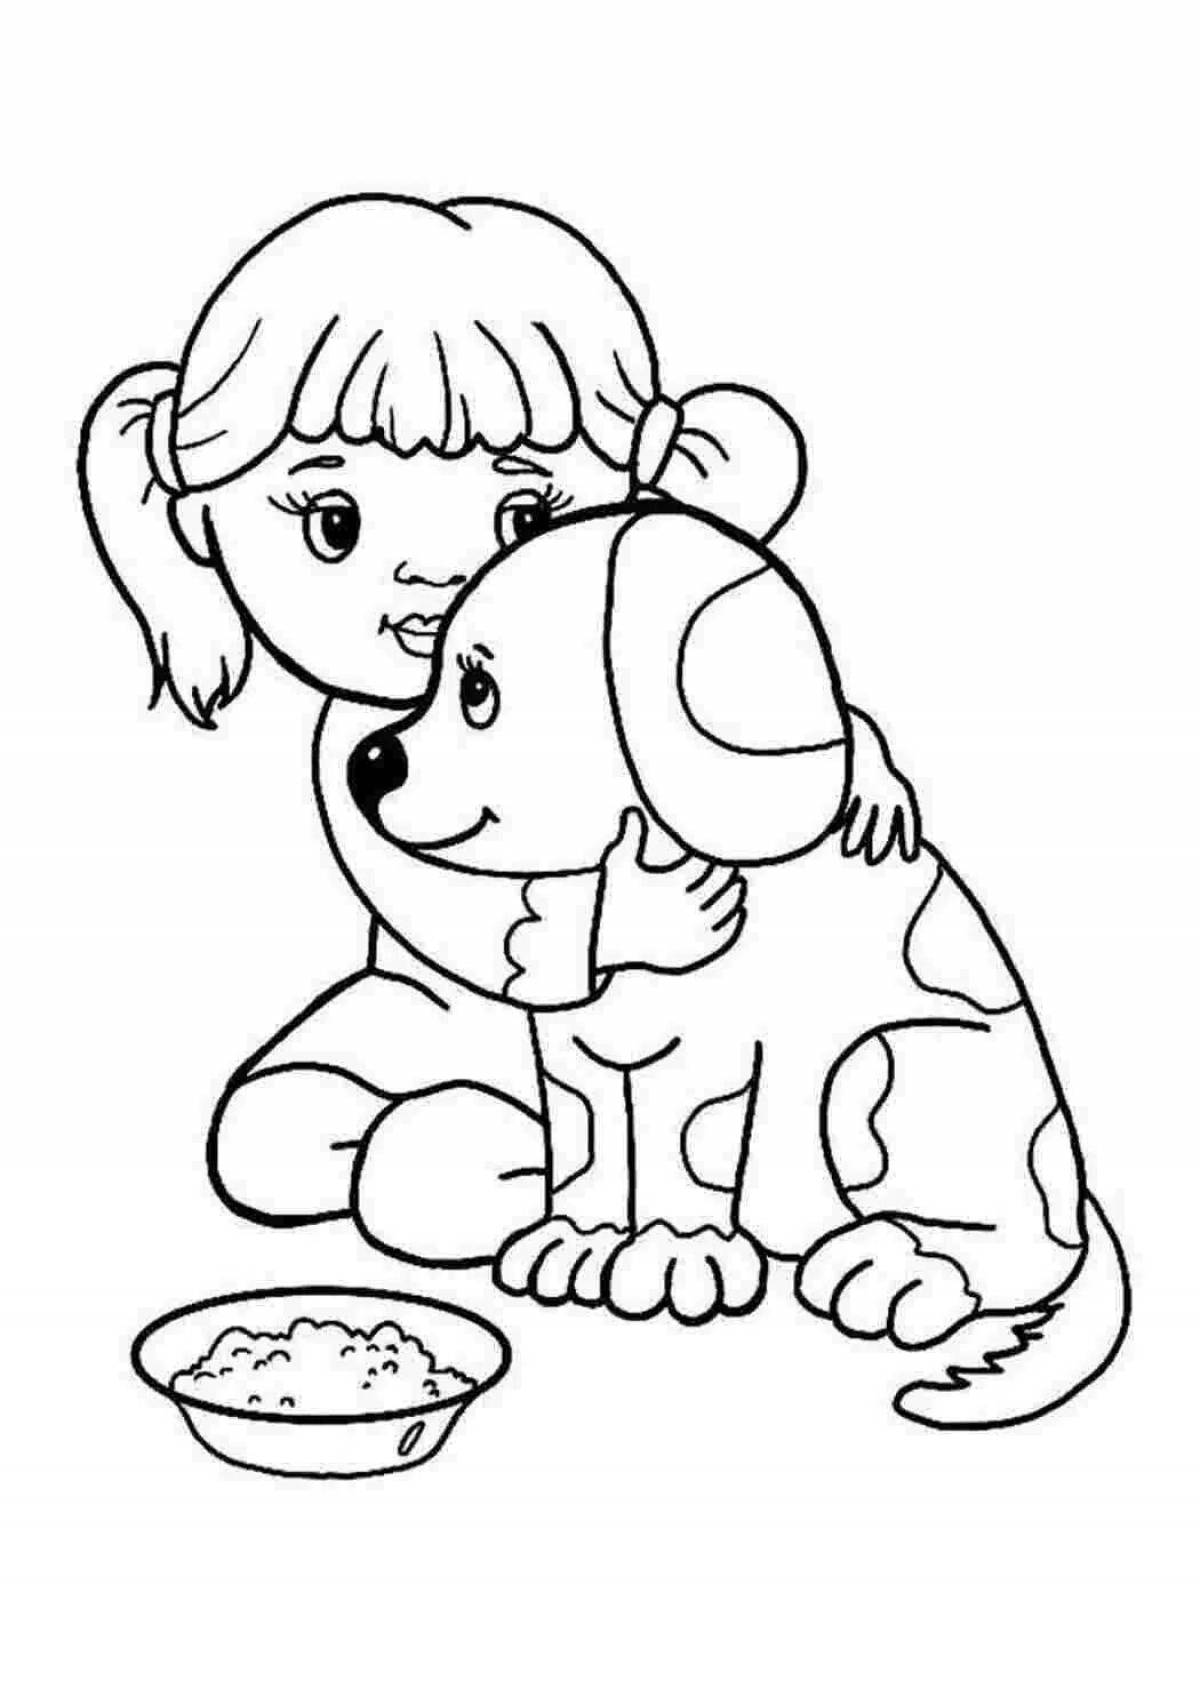 Comic coloring my puppy Mikhalkov for children